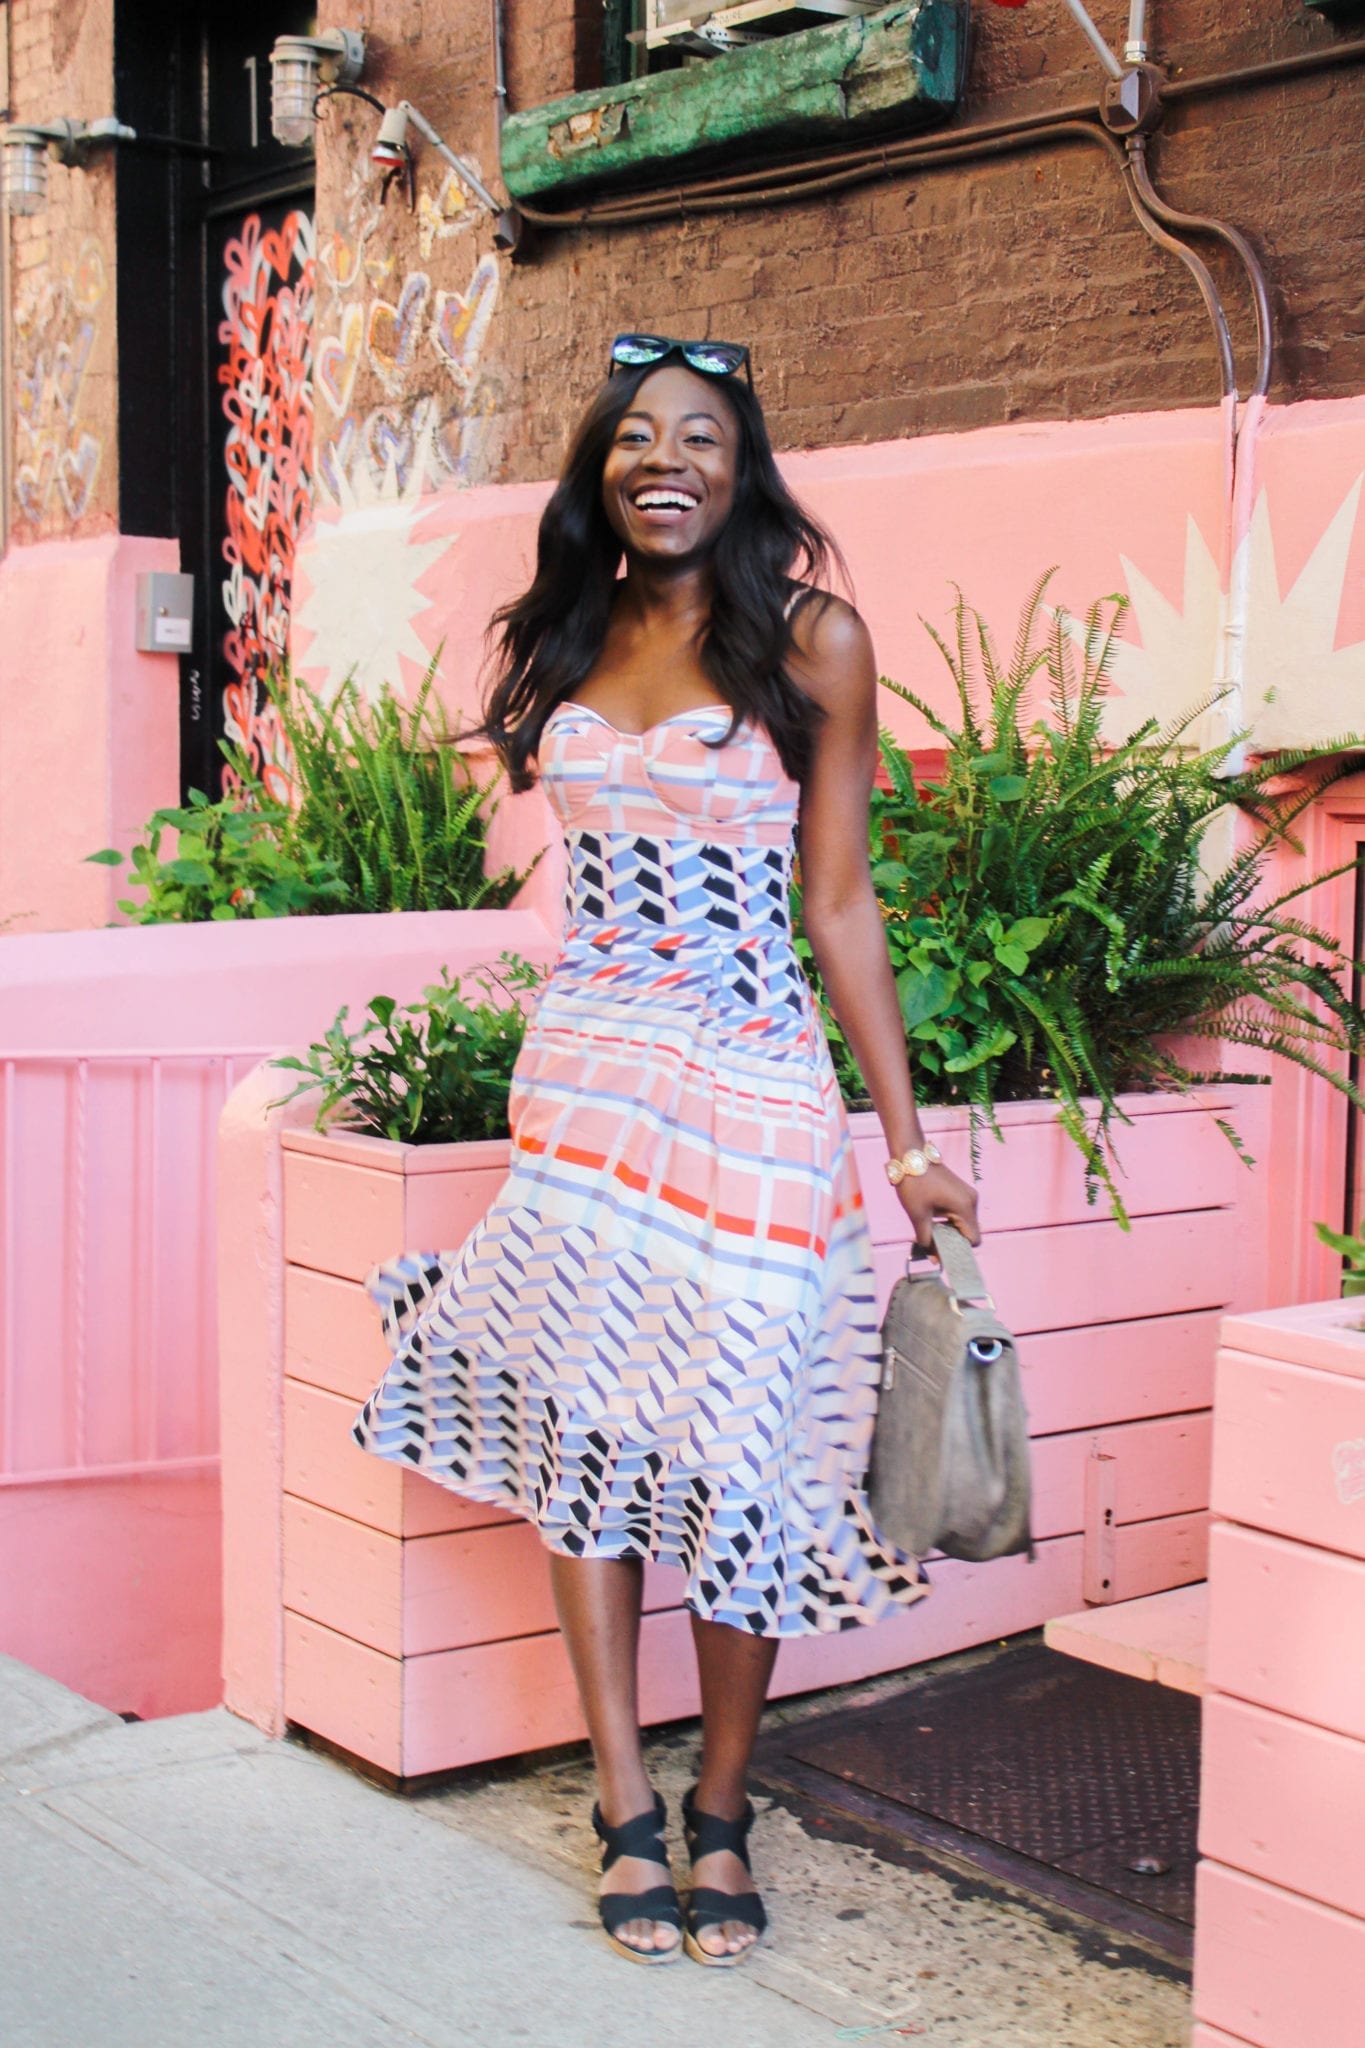 black girl blogger fashion blogger southern blogger personal brand for bloggers all pink restaurant